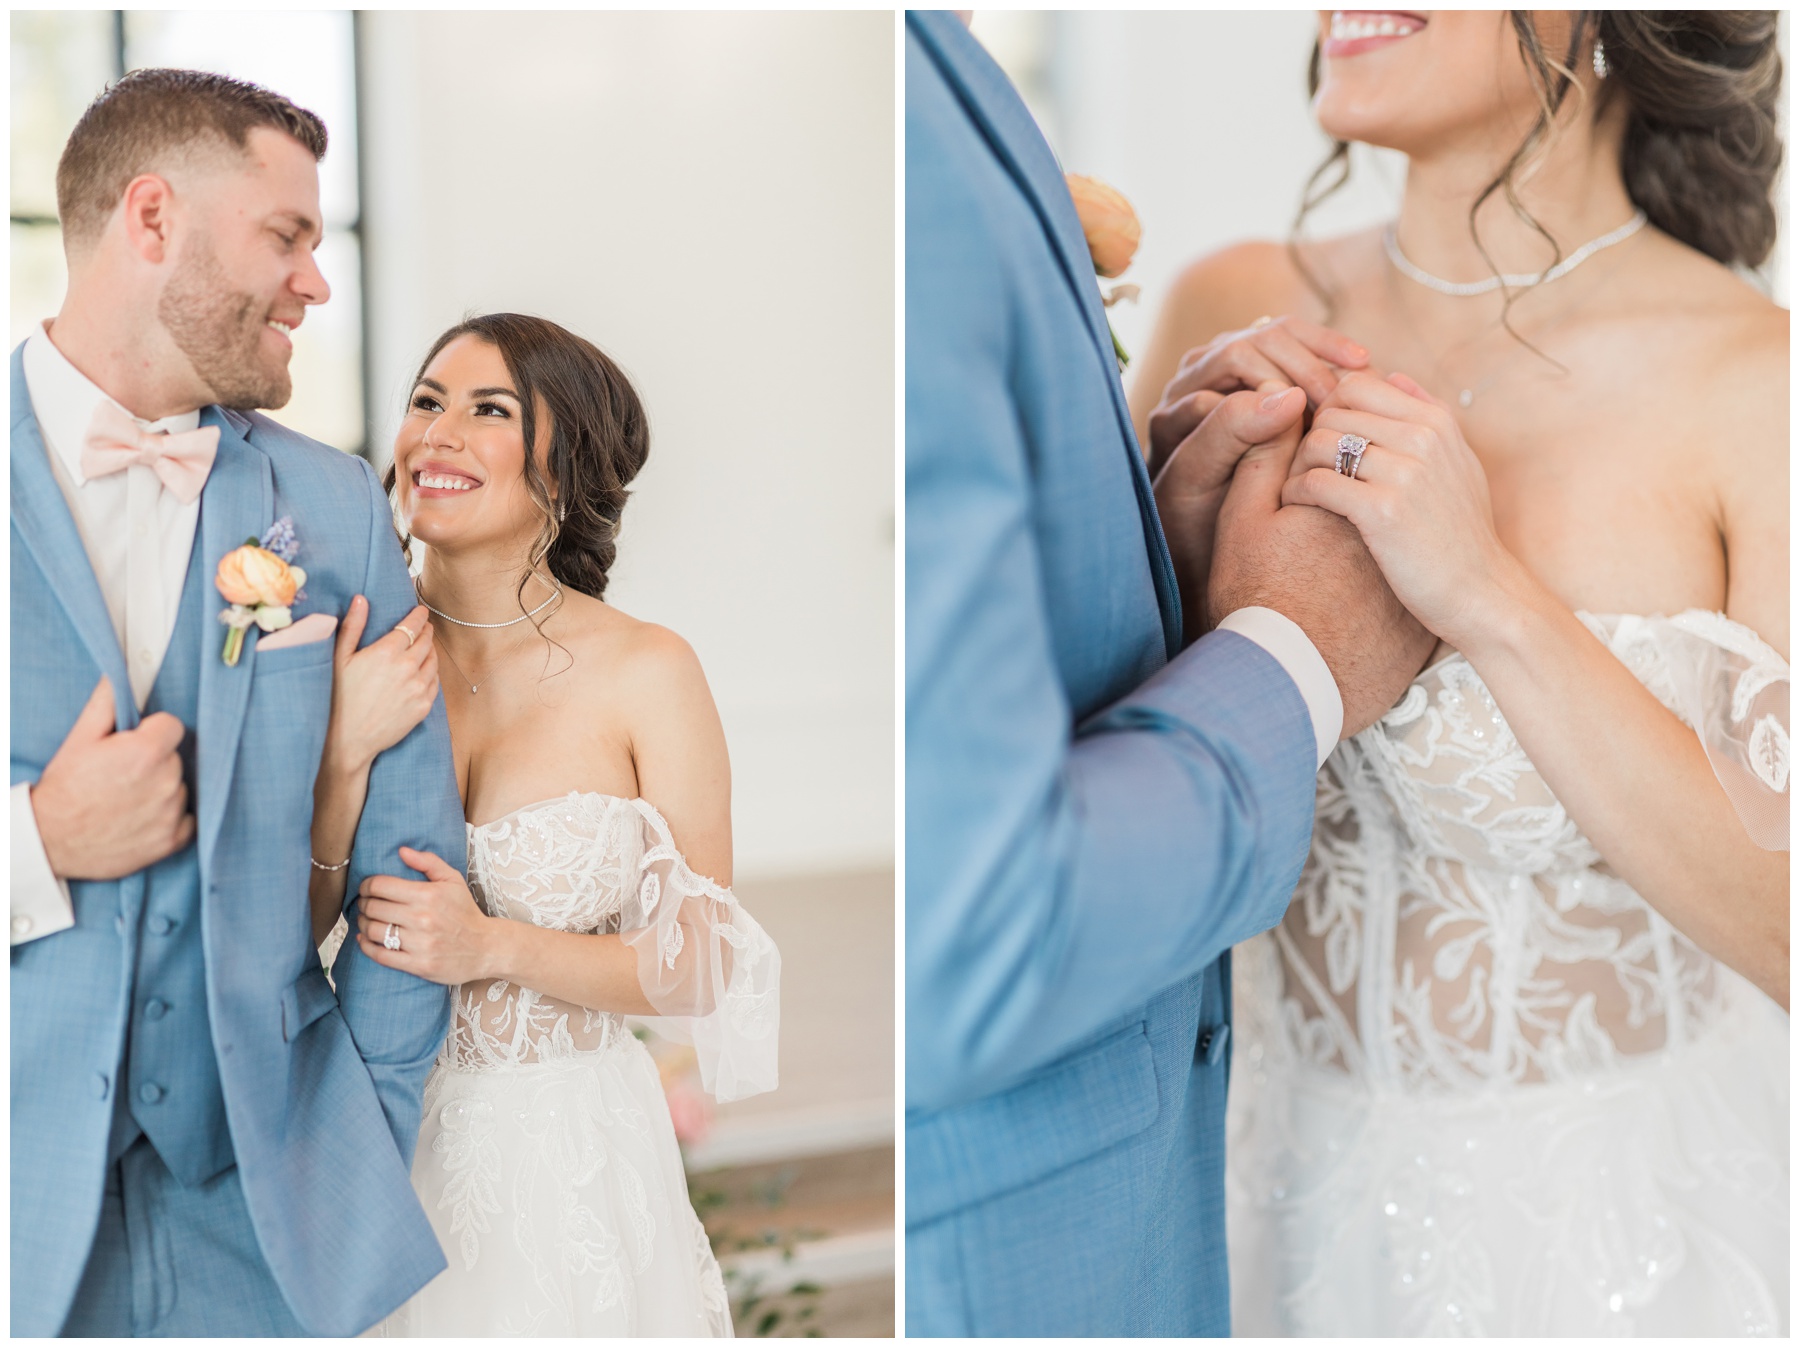 Bride in a lace gown with off the shoulder sleeves and a low neckline